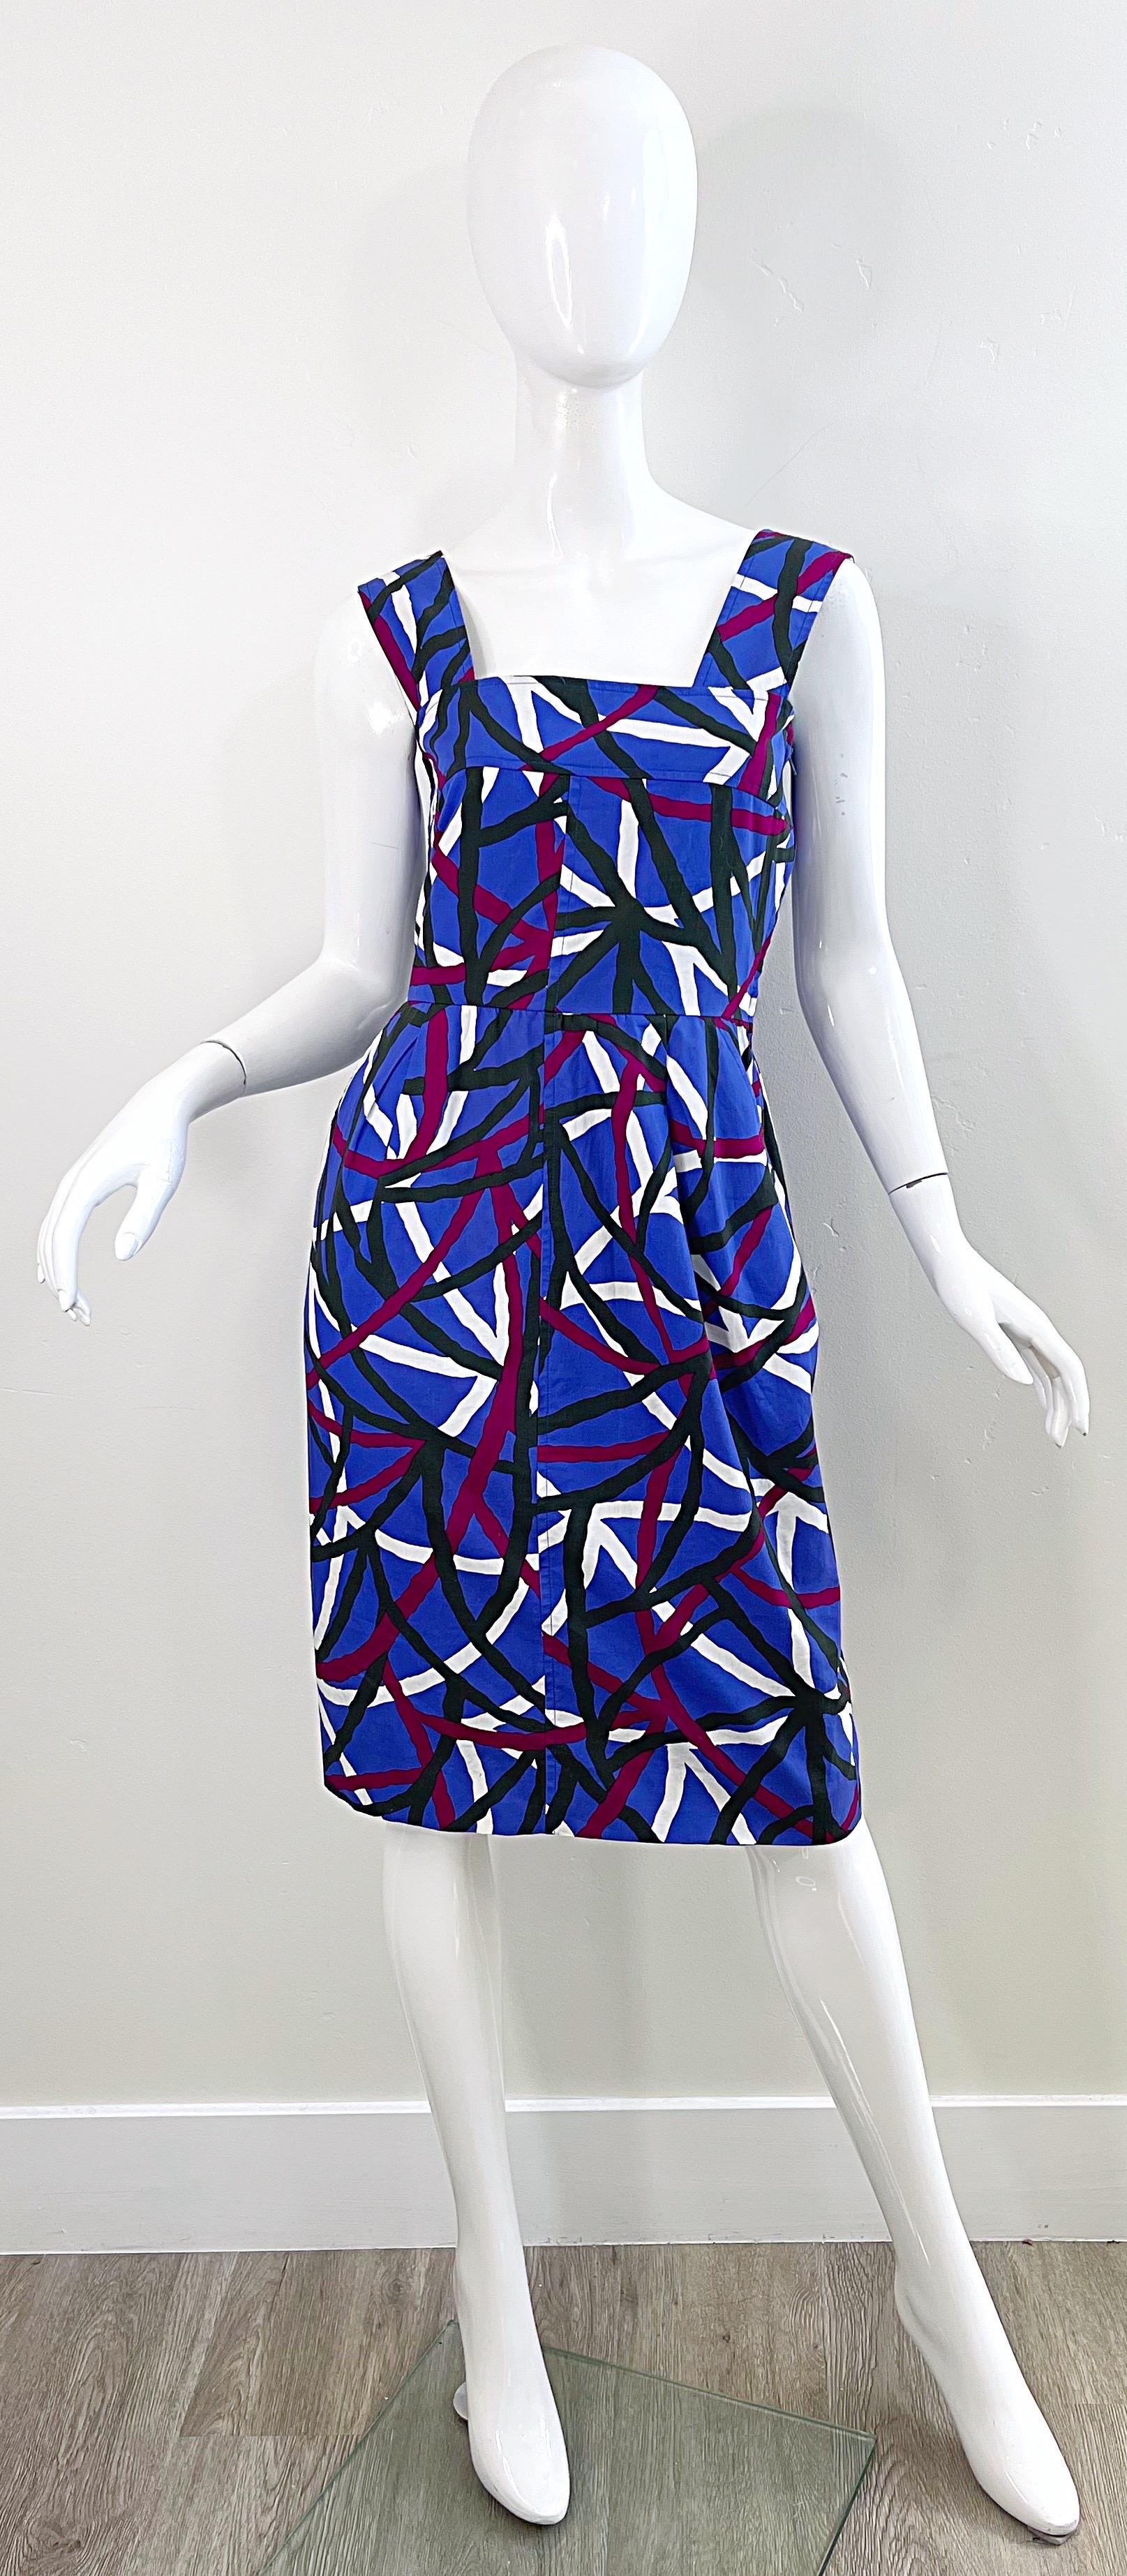 Amazing late 70s YVES SAINT LAURENT Rive Gauche graffiti print sleeveless cotton dress ! Features vibrant colors of purple, fuchsia pink, black and white. Hidden metal zipper up the side with hook-and-eye closure. Tailored bodice with a forgiving